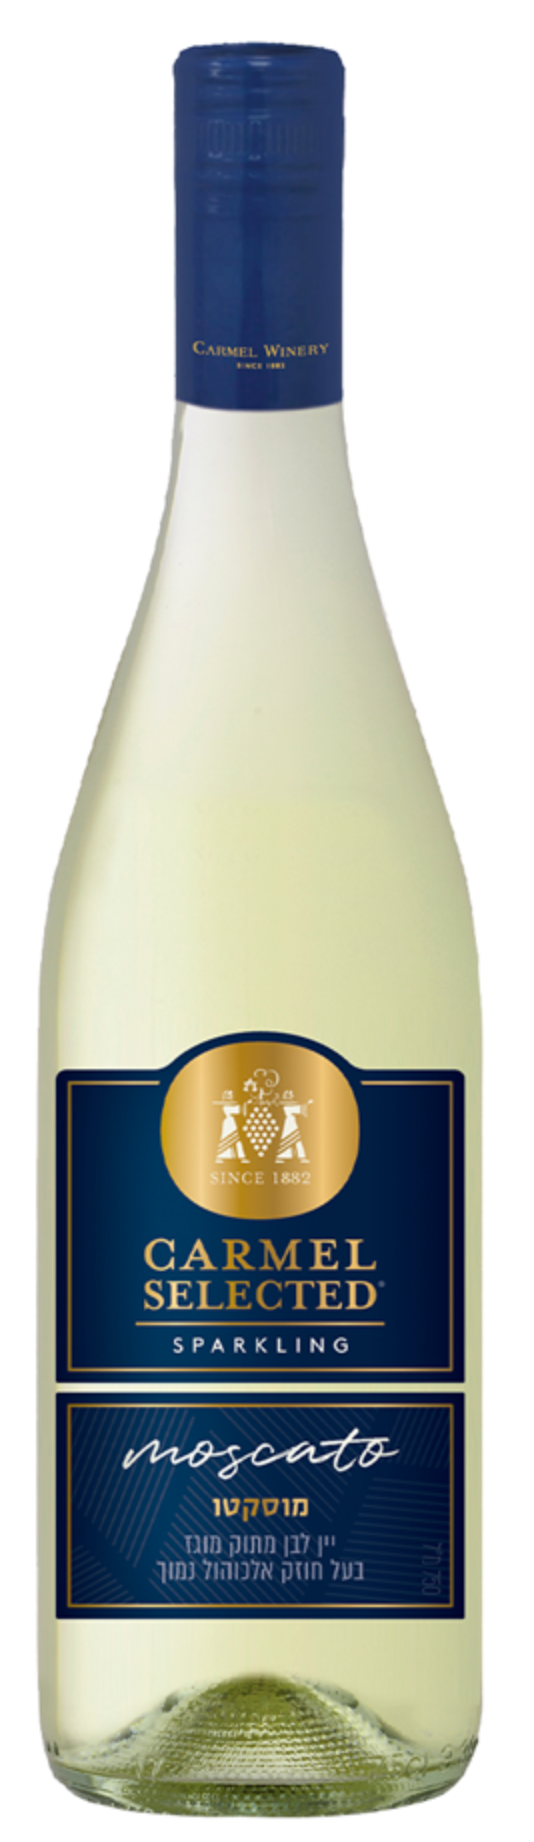 Carmel Selected Sparkling Moscato 2020 (New)